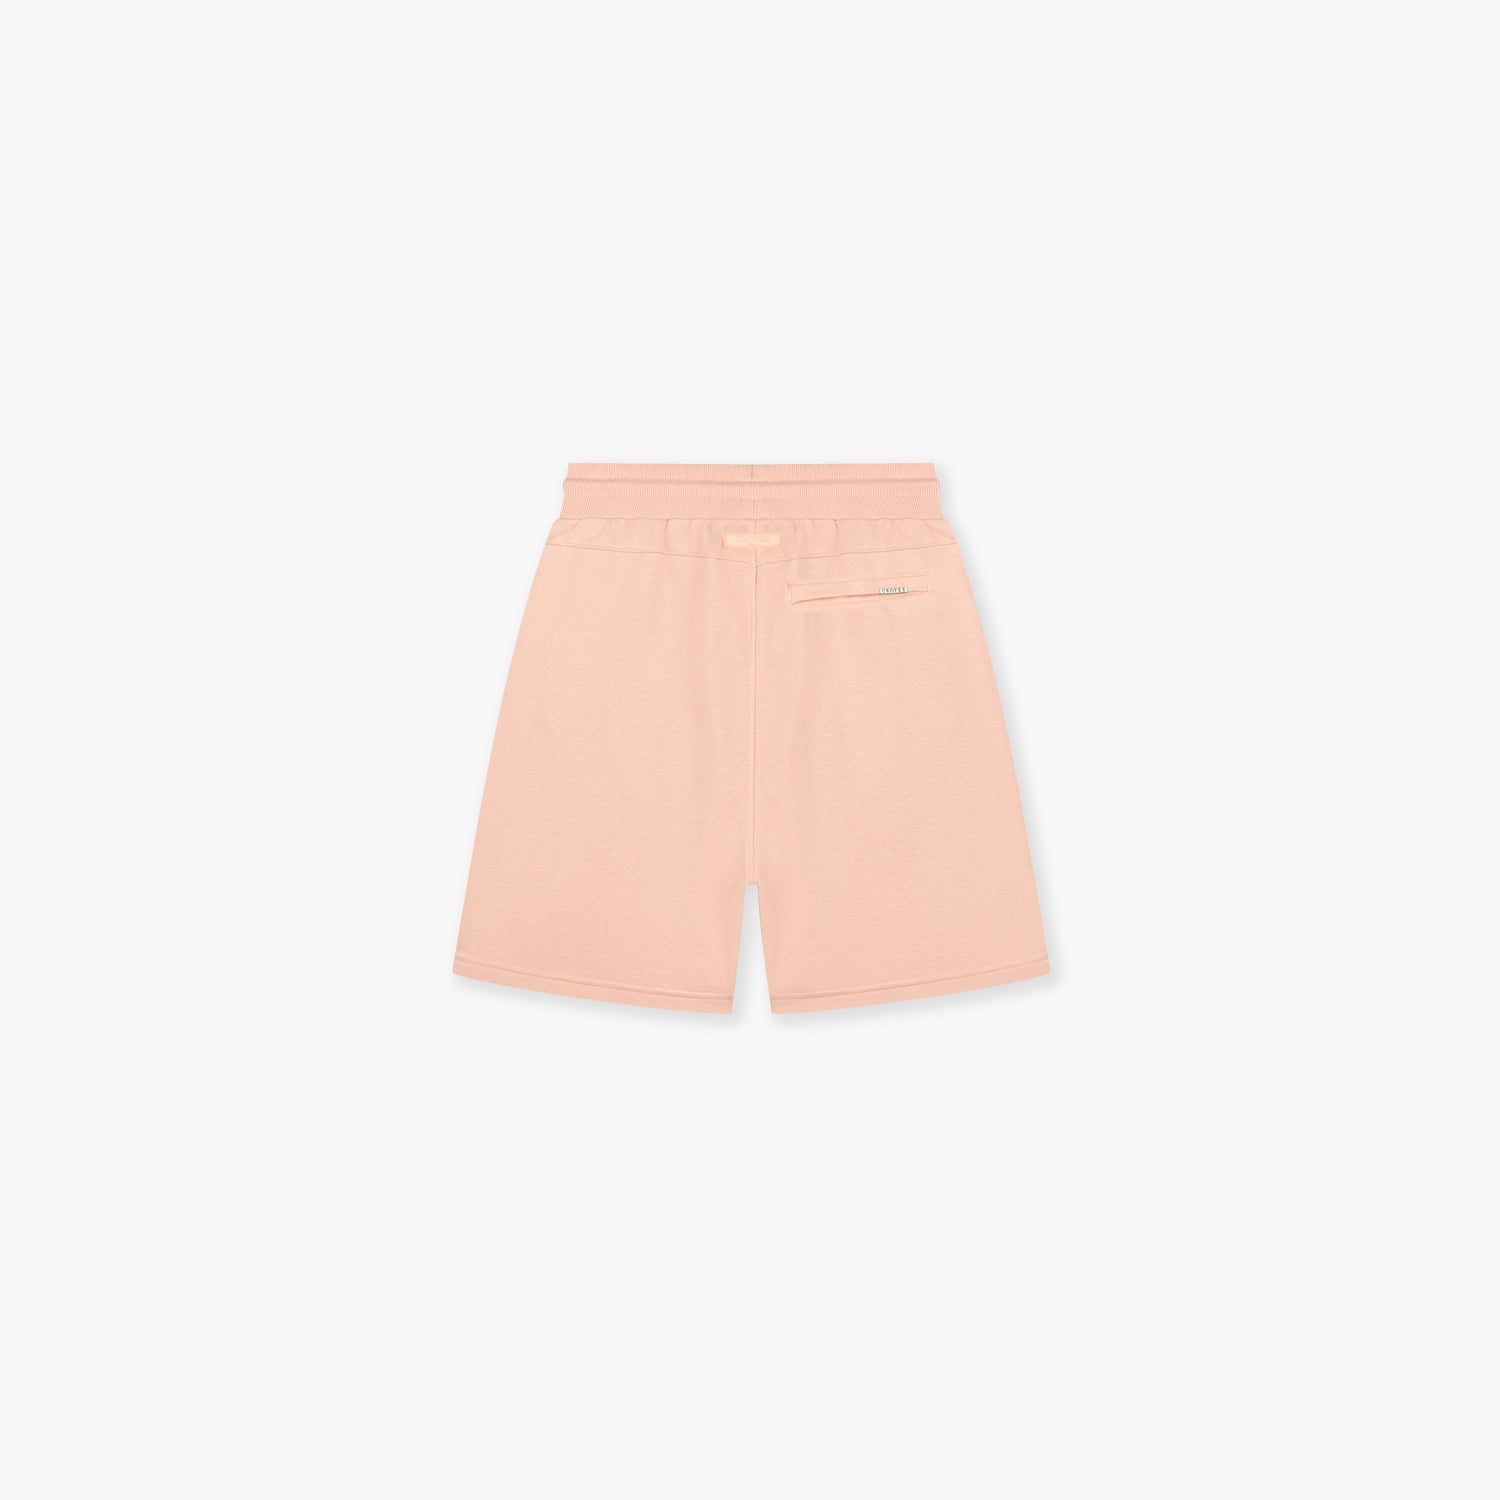 CROYEZ ABSTRACT SHORT - PINK